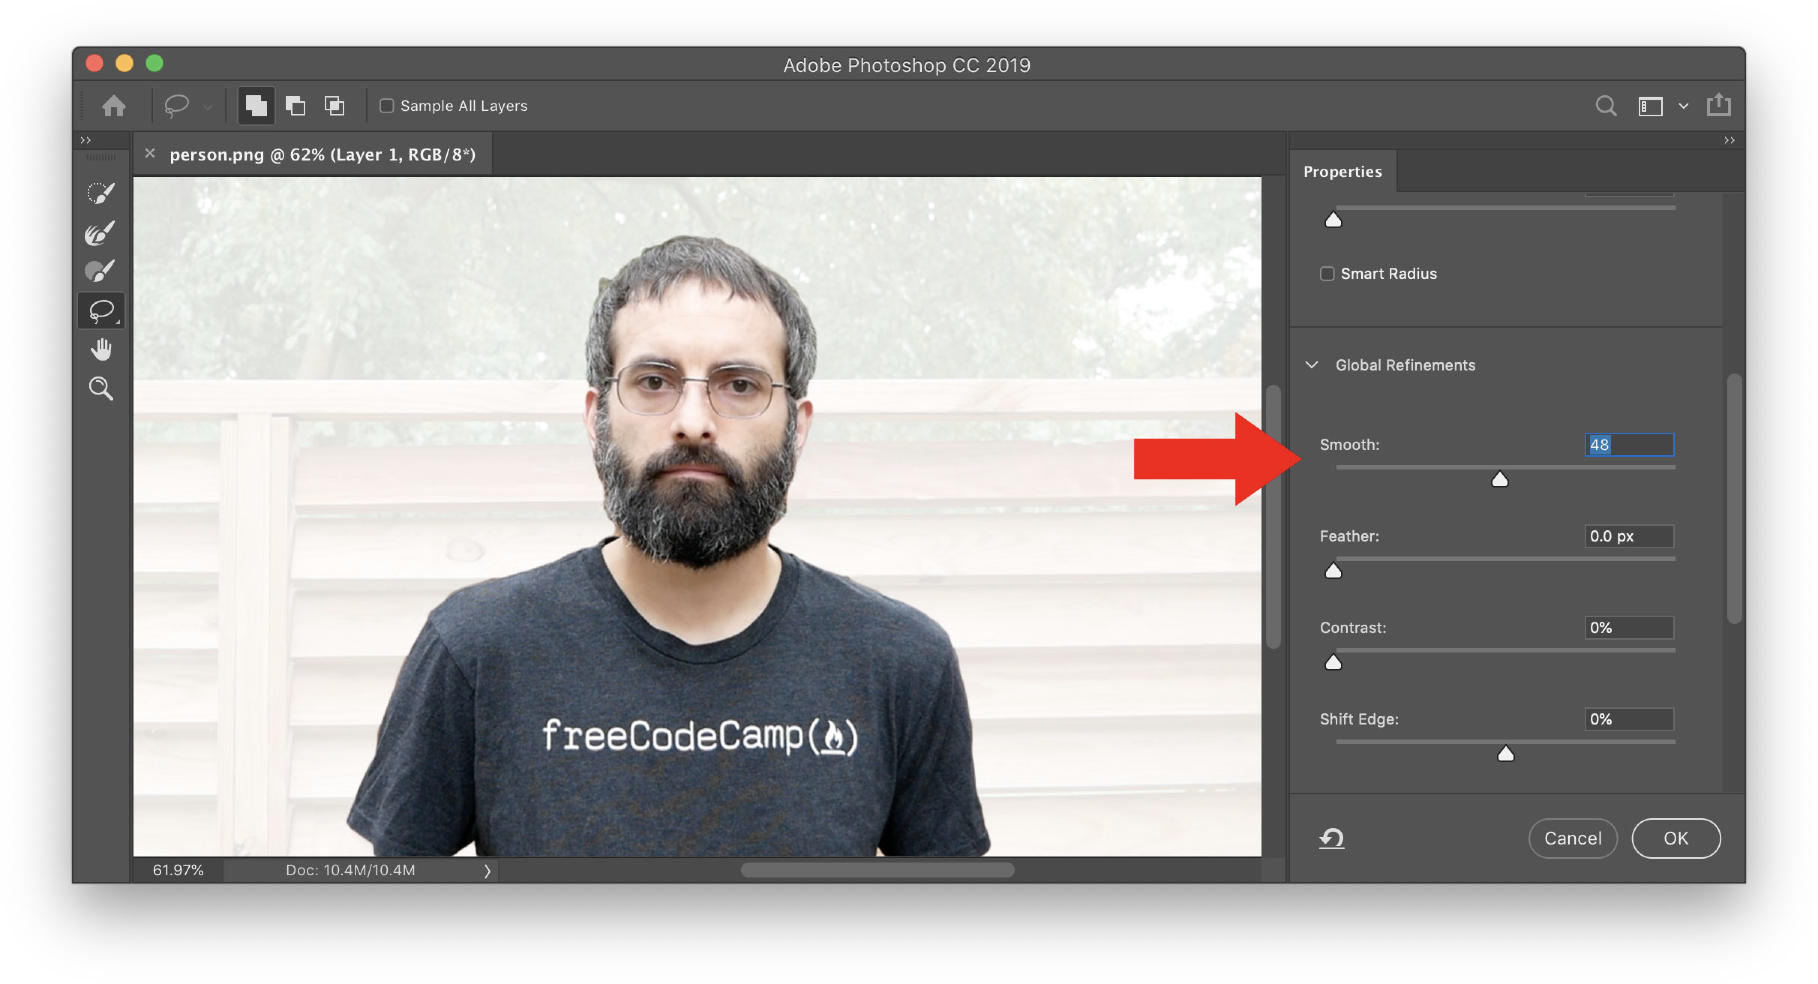 How to smooth or soften edges in Photoshop - Adobe